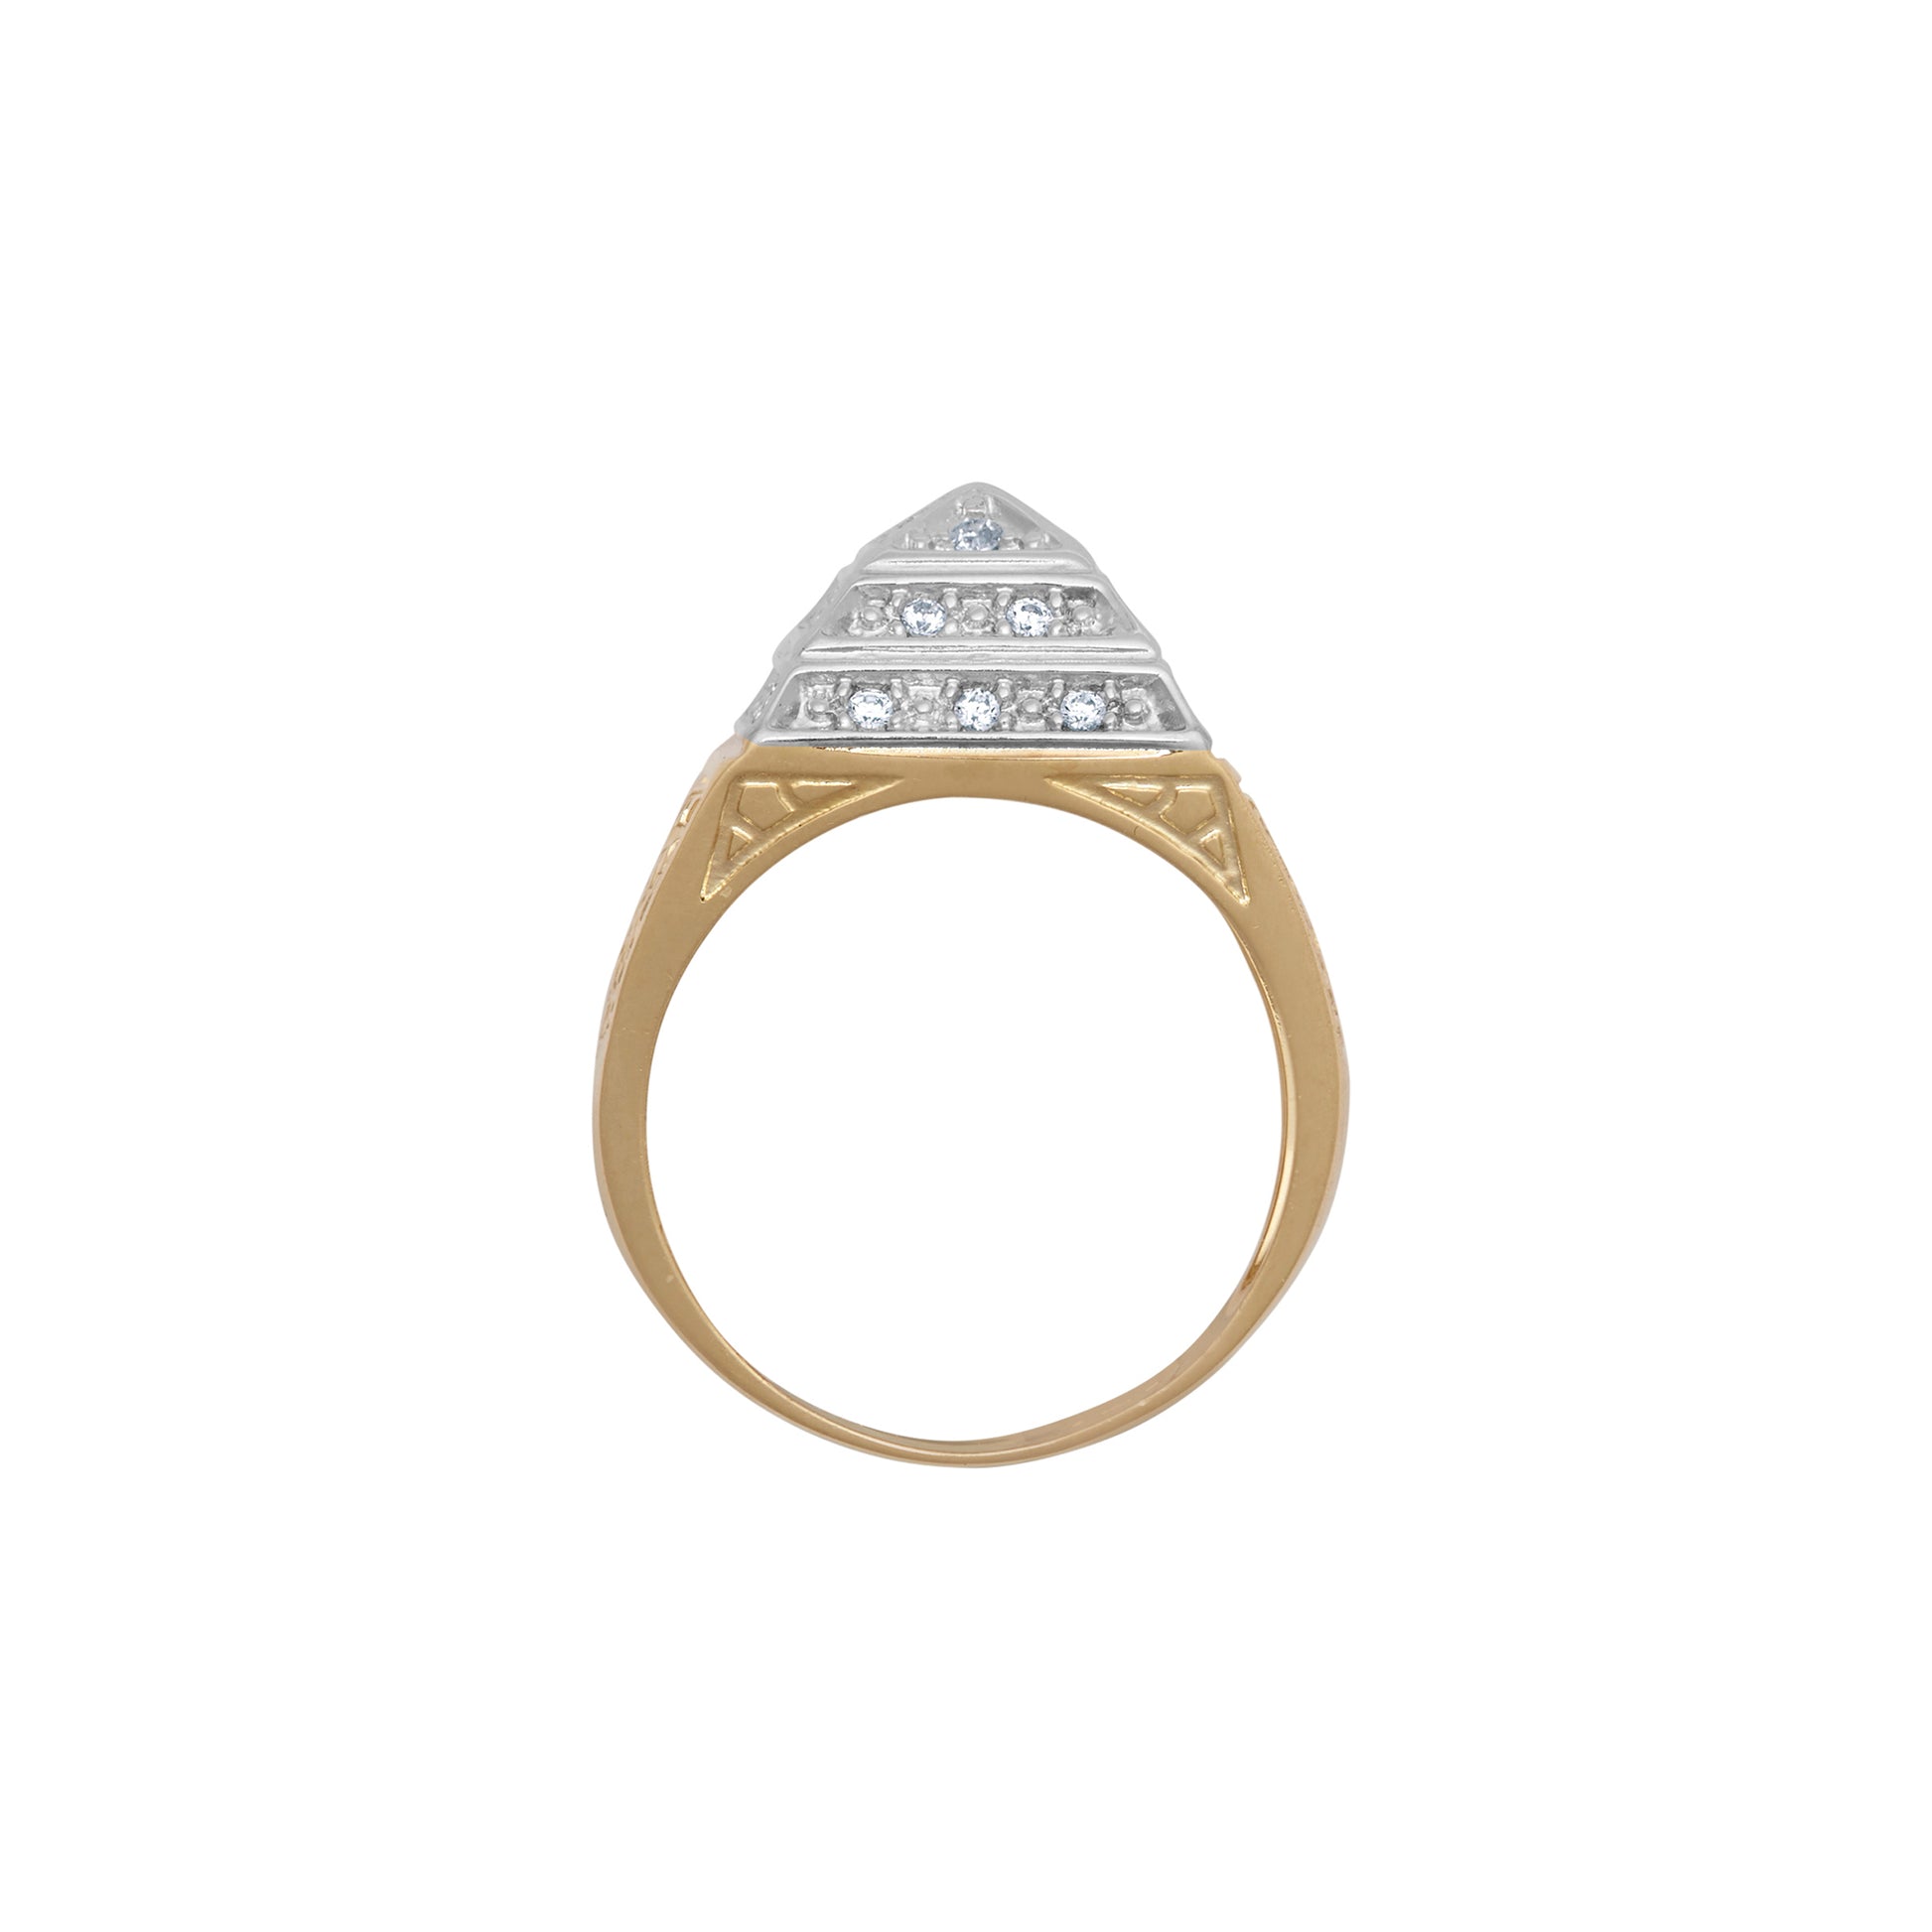 9ct 2-Colour Gold  Egyptian Pyramid 10mm Signet Pinky Baby Ring - JBR036